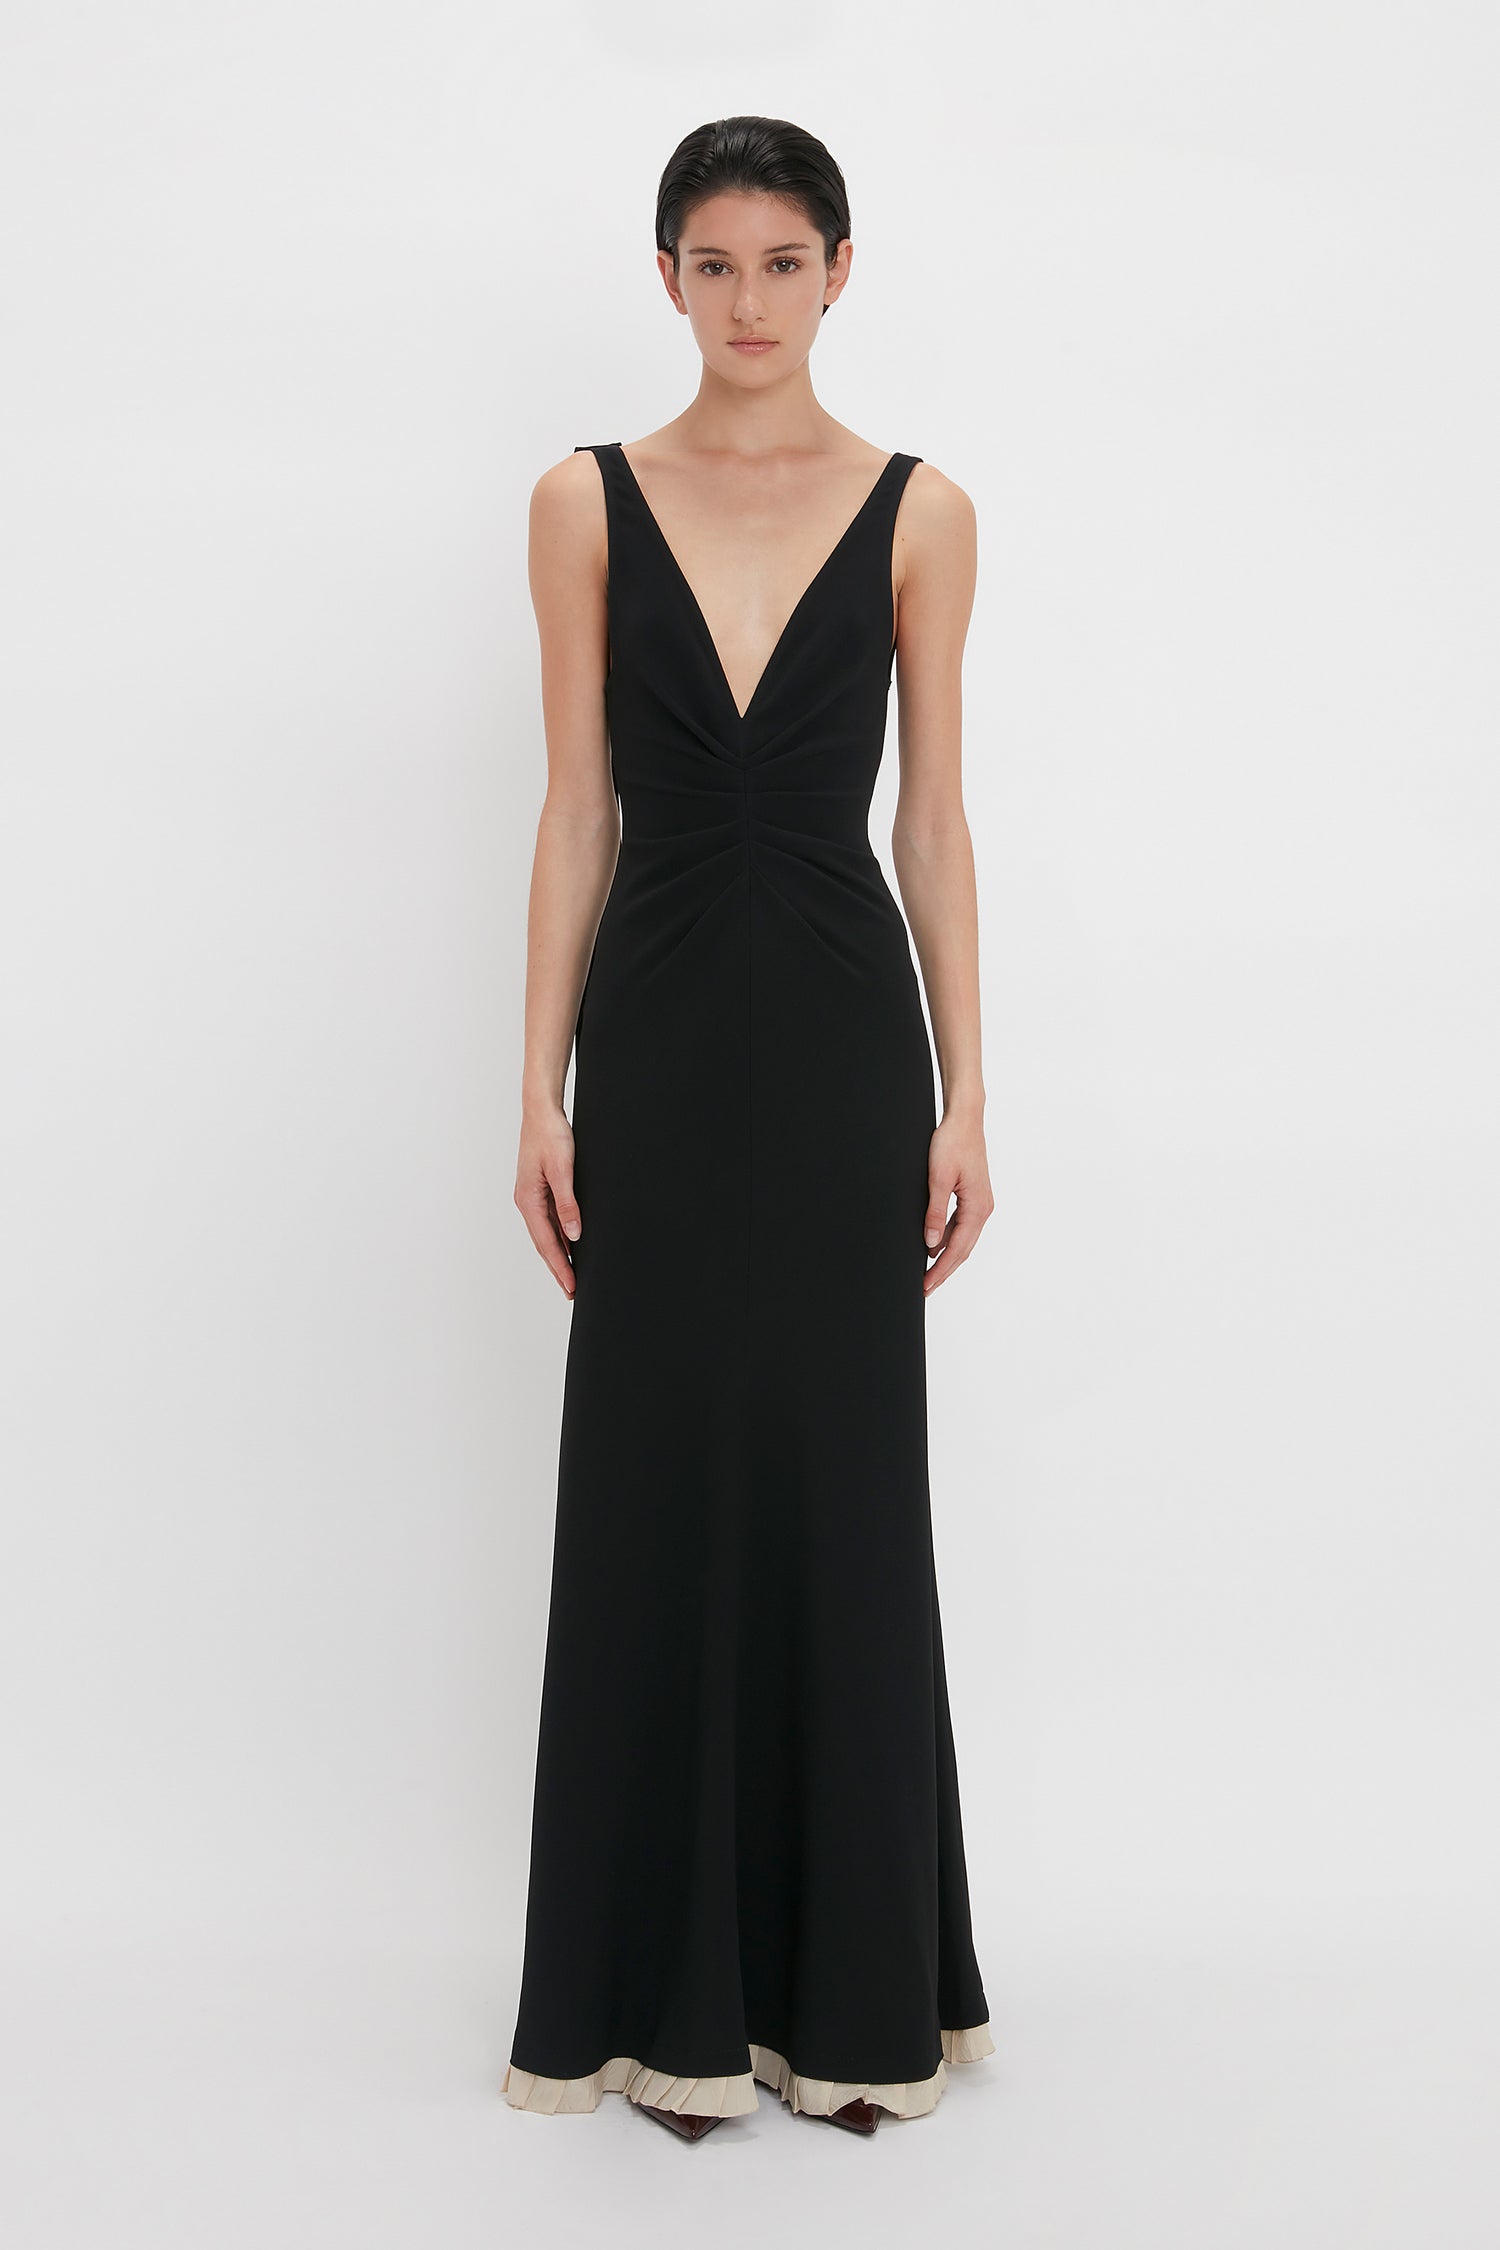 A person stands against a plain background wearing a Victoria Beckham V-Neck Gathered Waist Floor-Length Gown In Black with a deep V-neckline, slightly flared at the hem, creating a flattering silhouette.